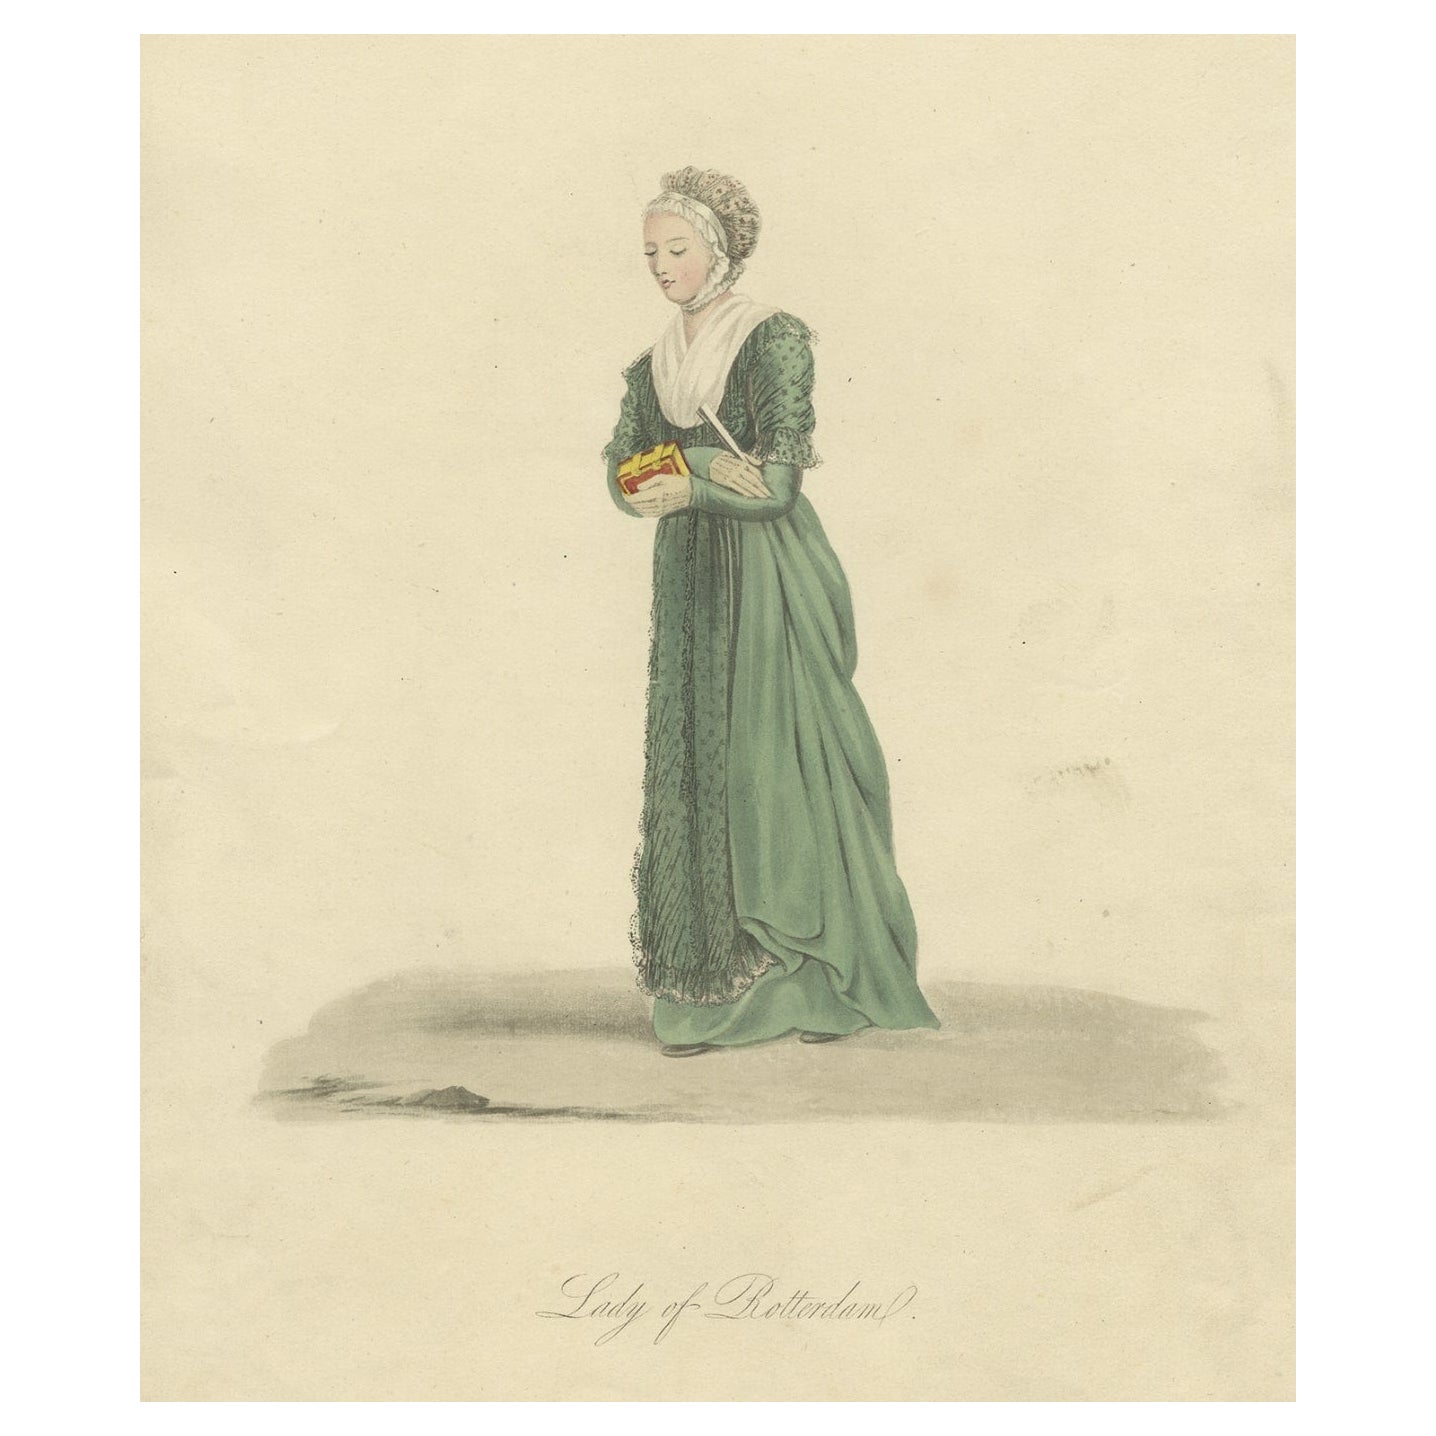 Antique Hand-Colored Engraving of a Lady of Rotterdam in The Netherlands, 1817